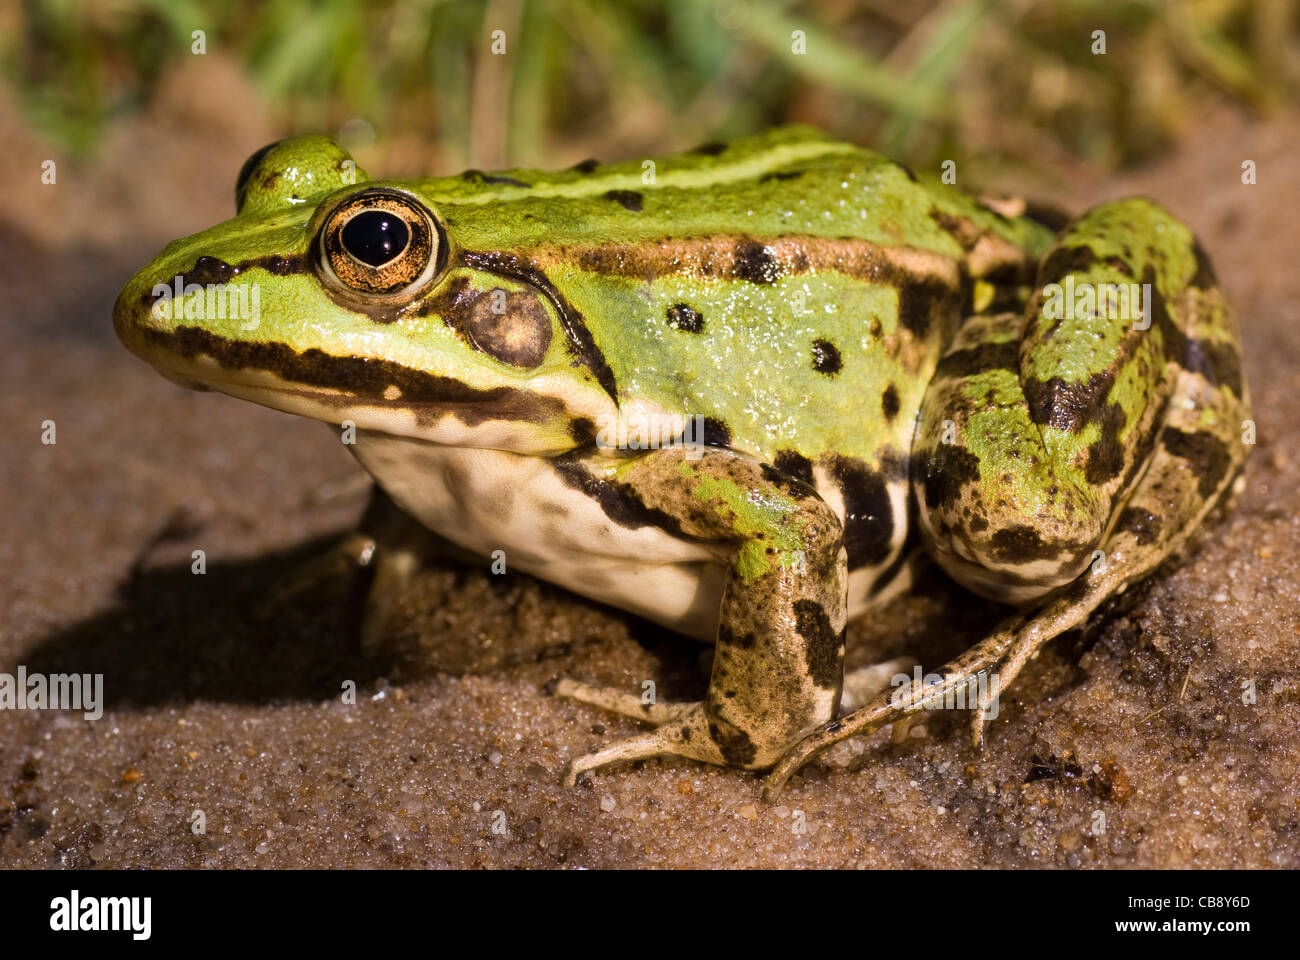 big green frog sit on wet sand Stock Photo